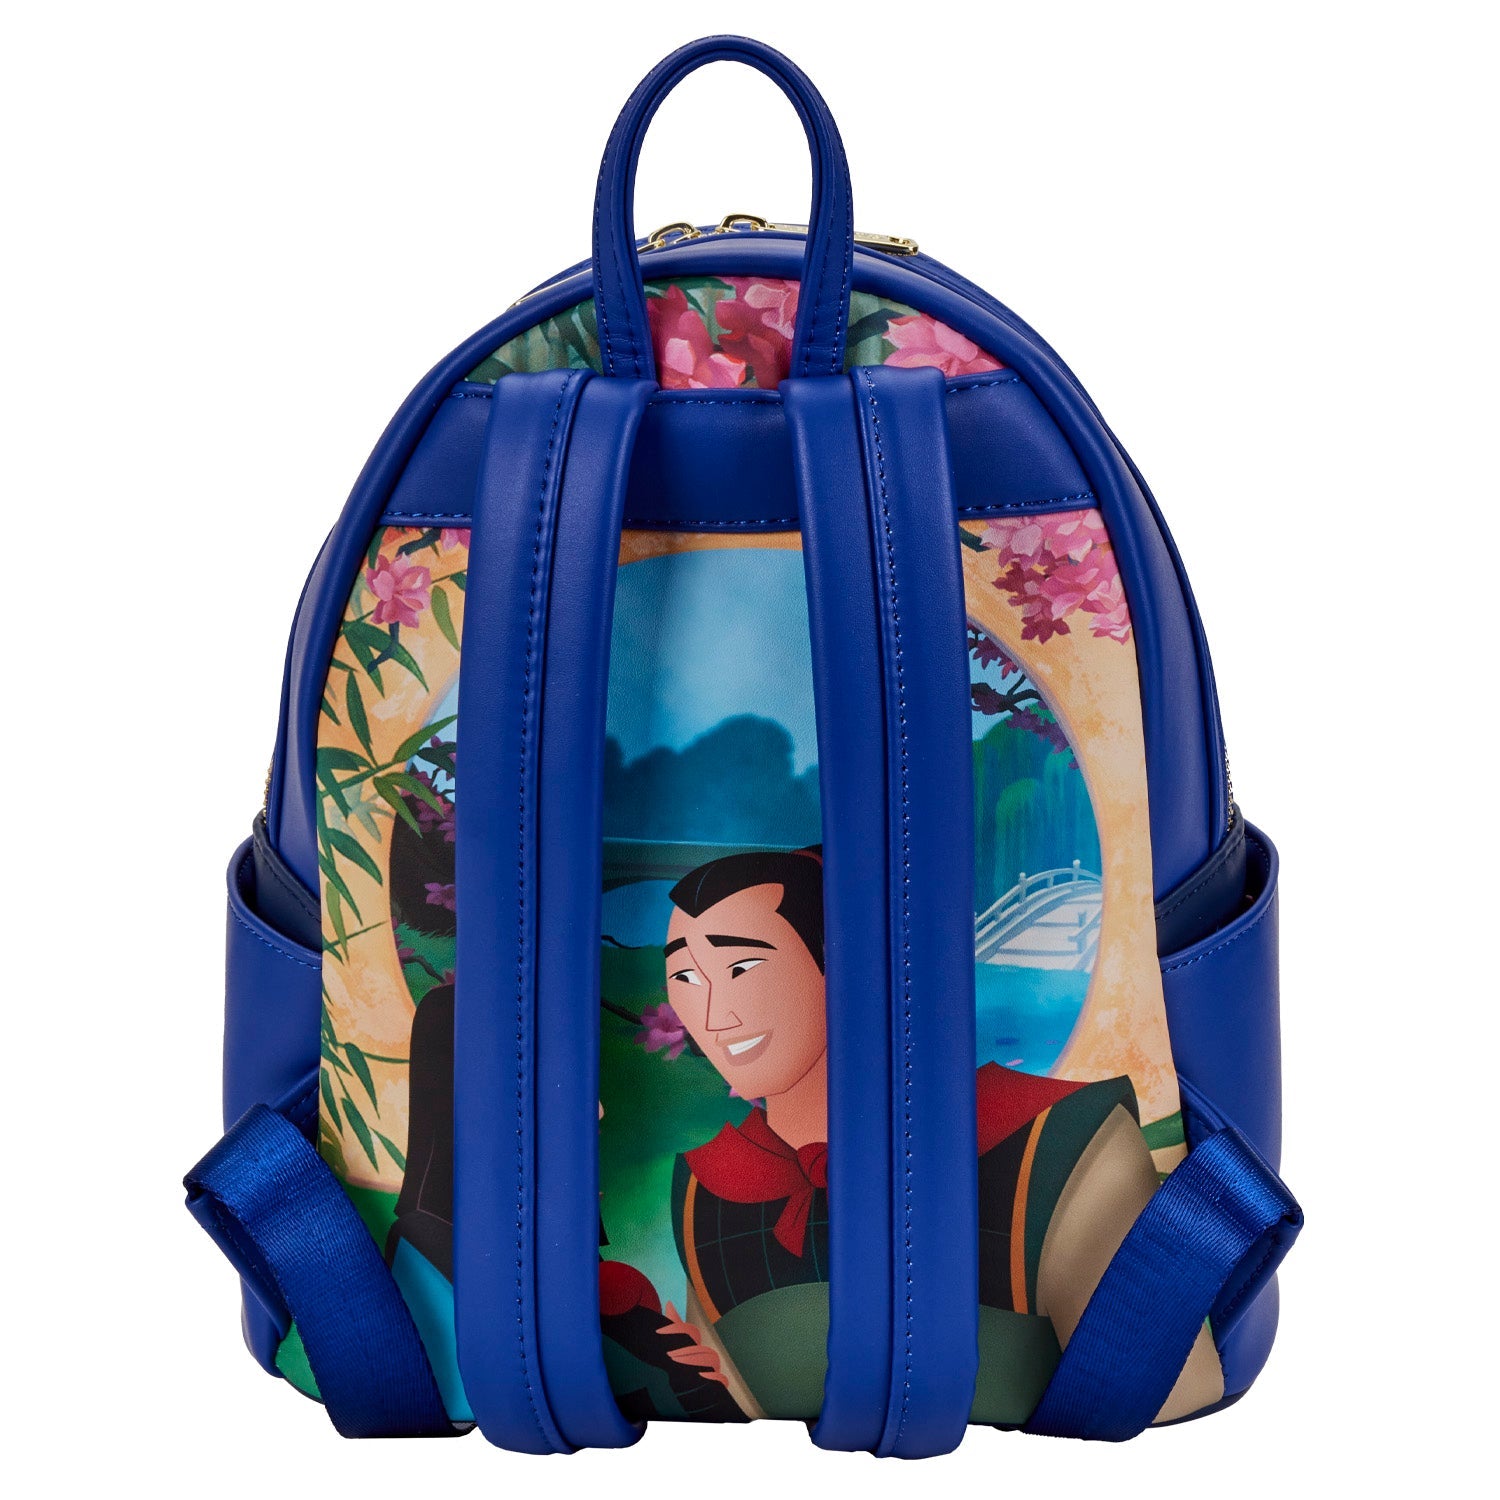 Loungefly x Disney Mulan Castle Light Up Mini Backpack - GeekCore